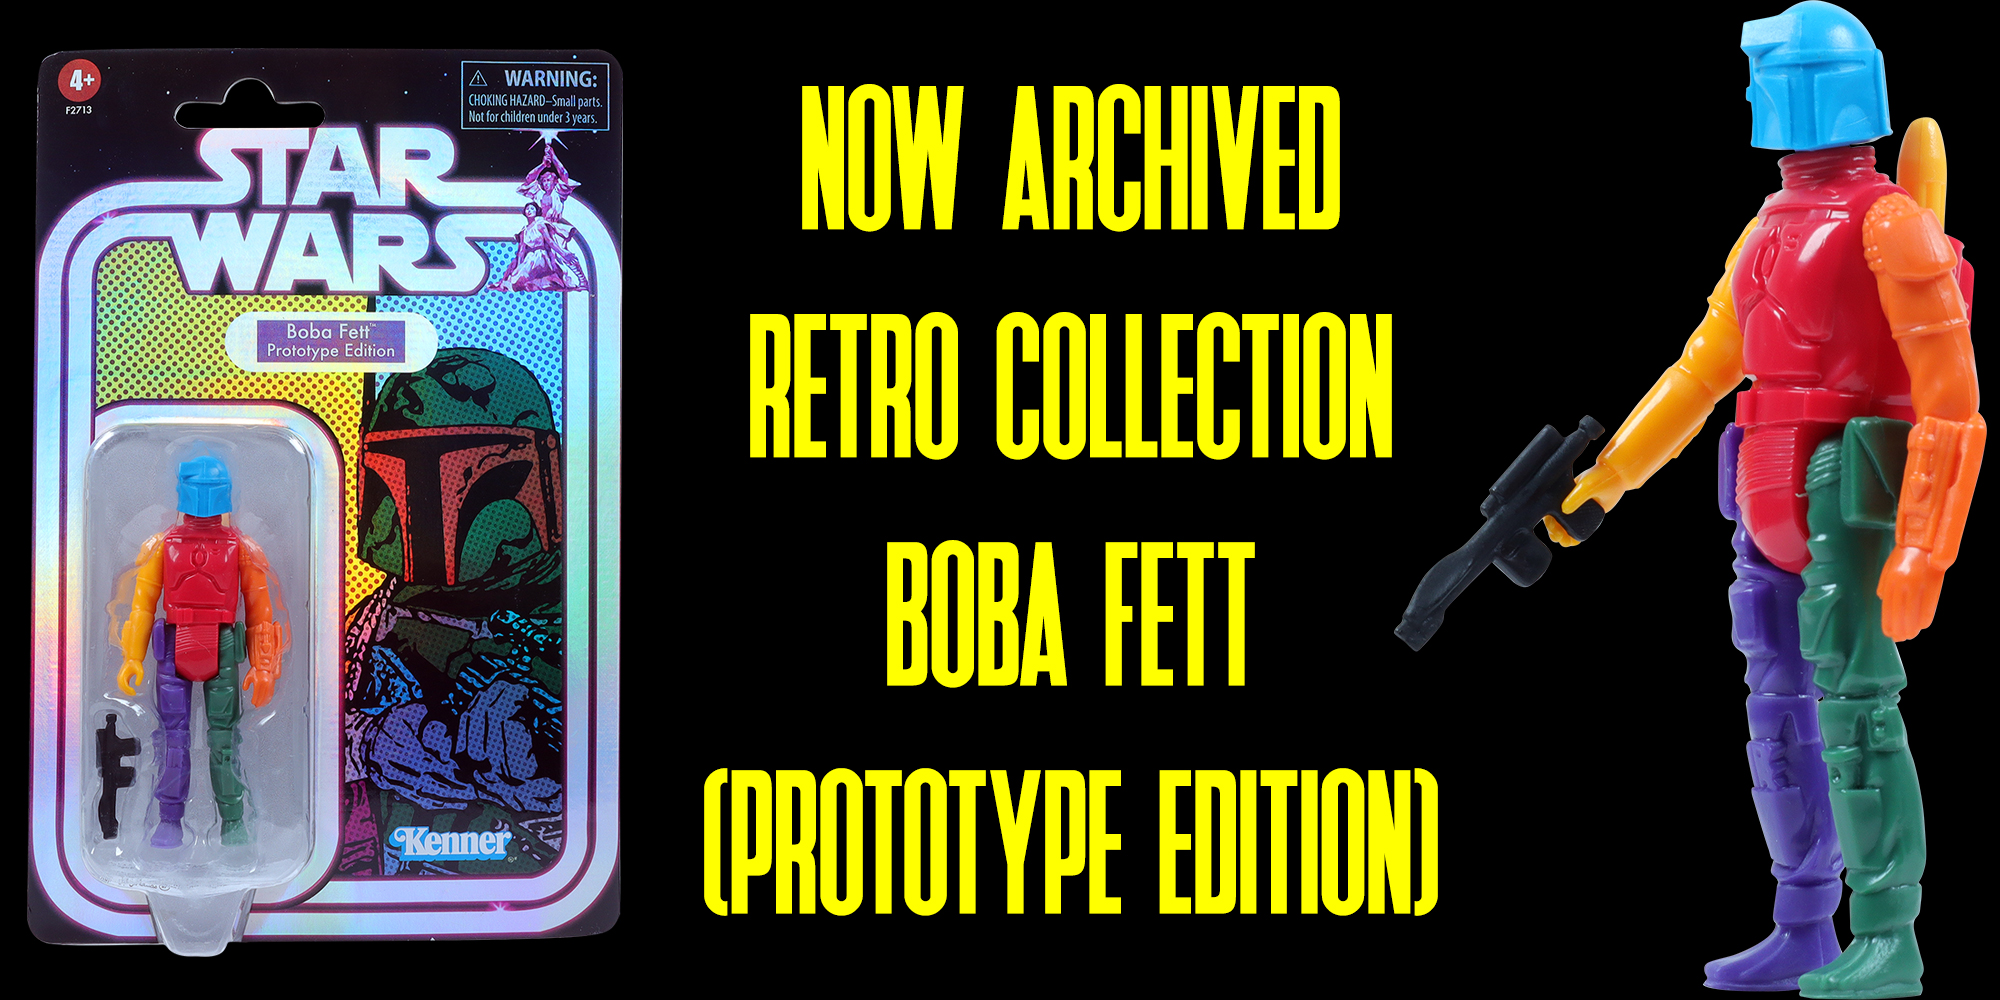 Retro Collection Boba Fett (Prototype Edition) - Now Archived!